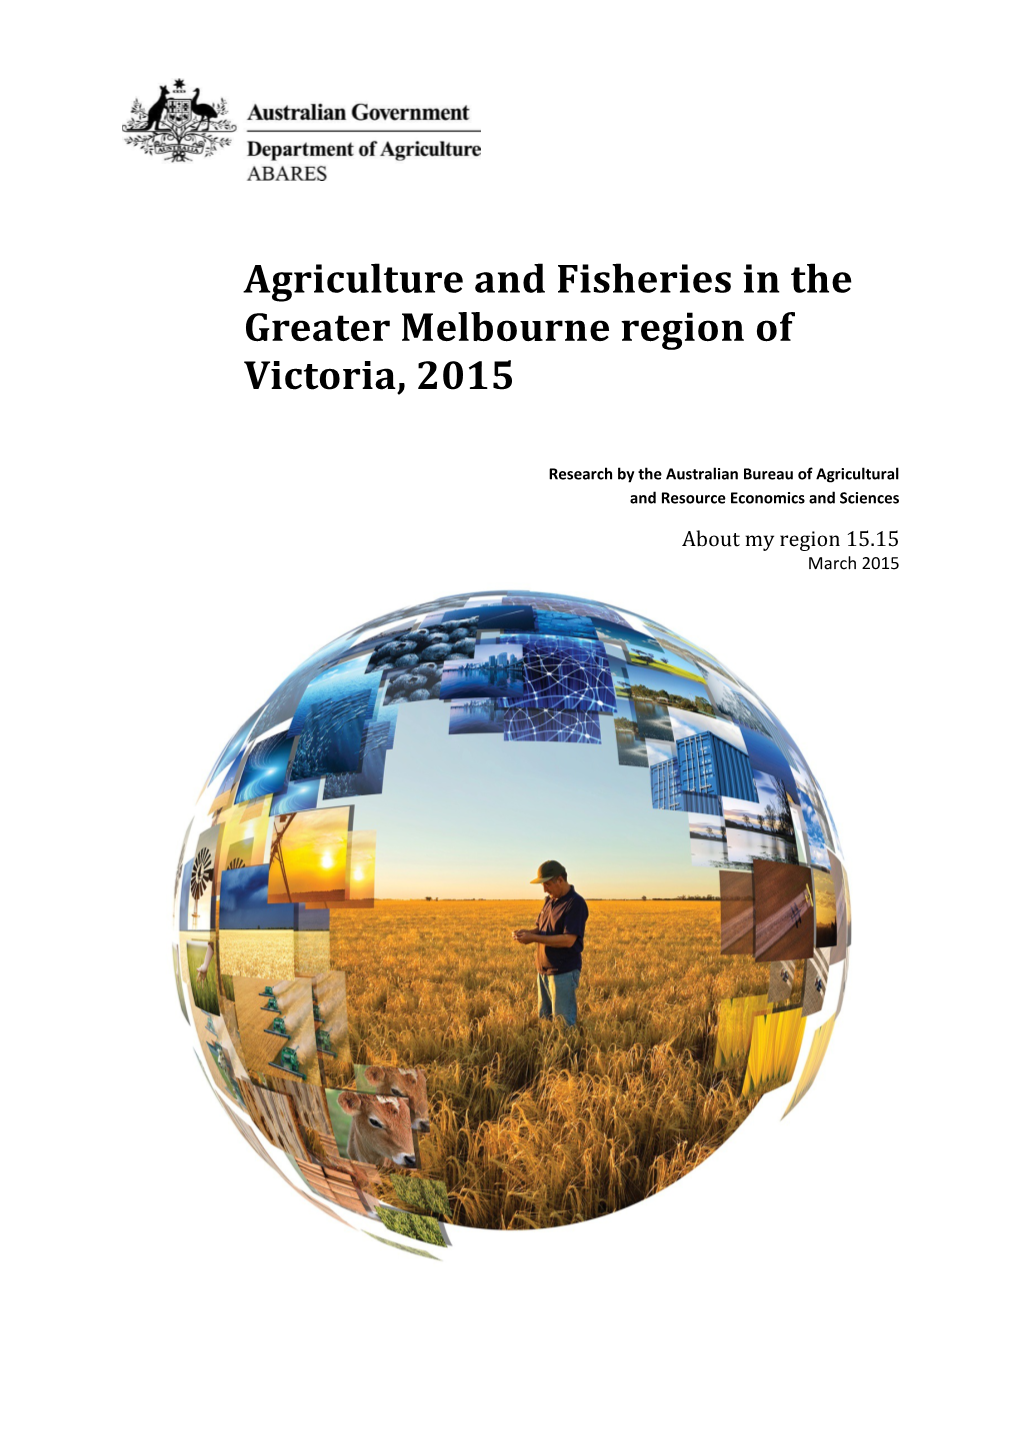 Agriculture and Fisheries in the Greater Melbourne Region of Victoria, 2015